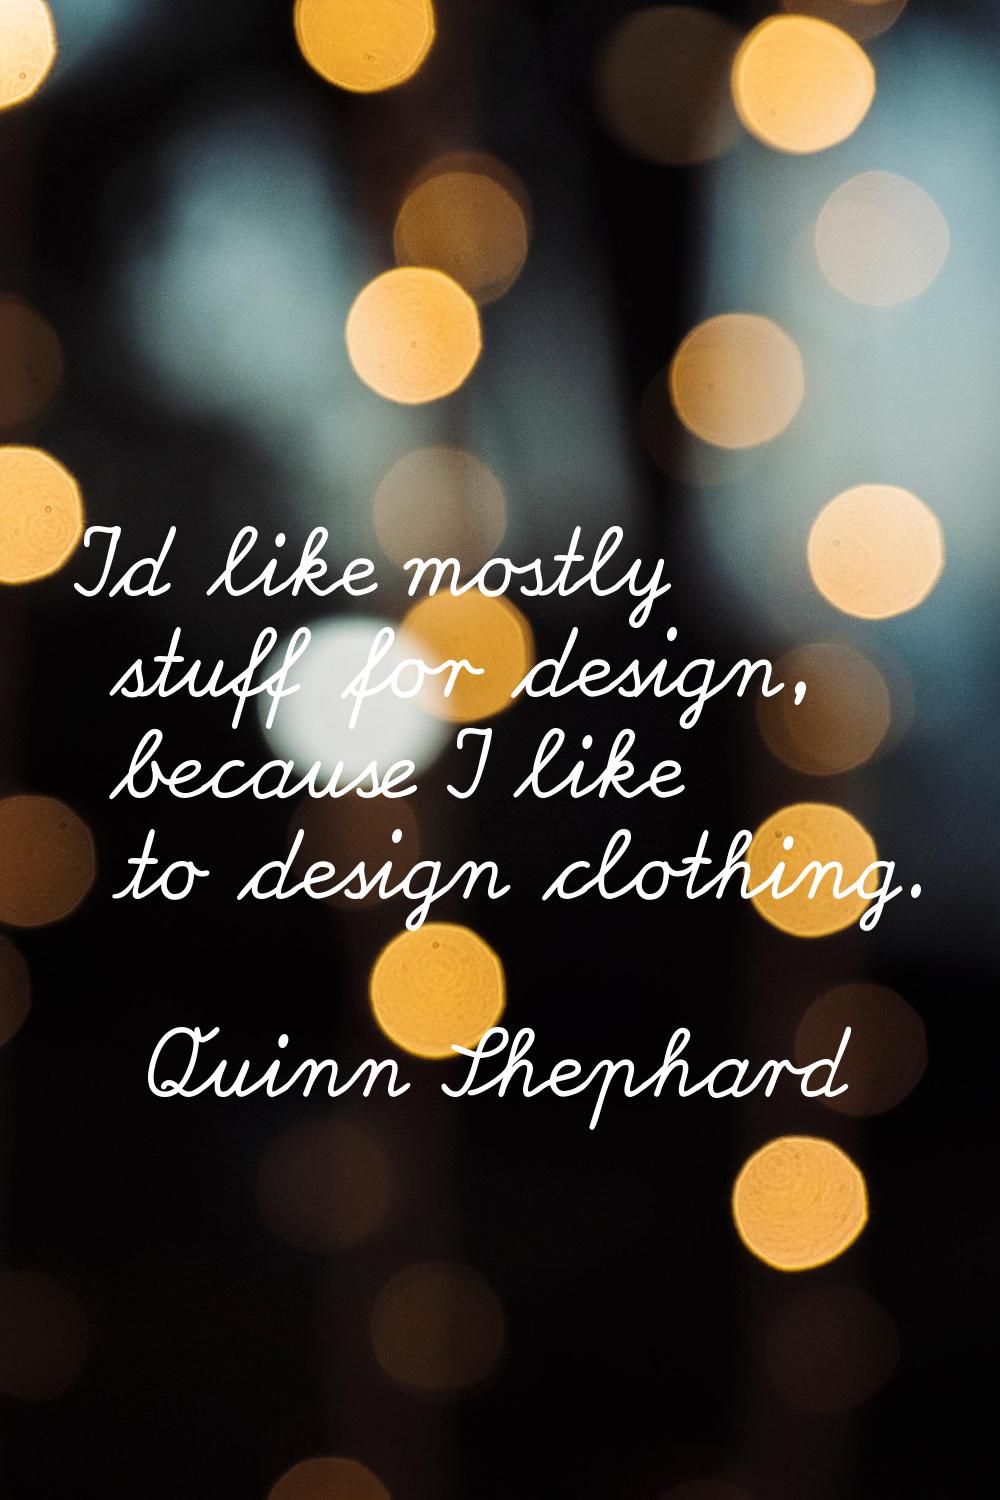 I'd like mostly stuff for design, because I like to design clothing.